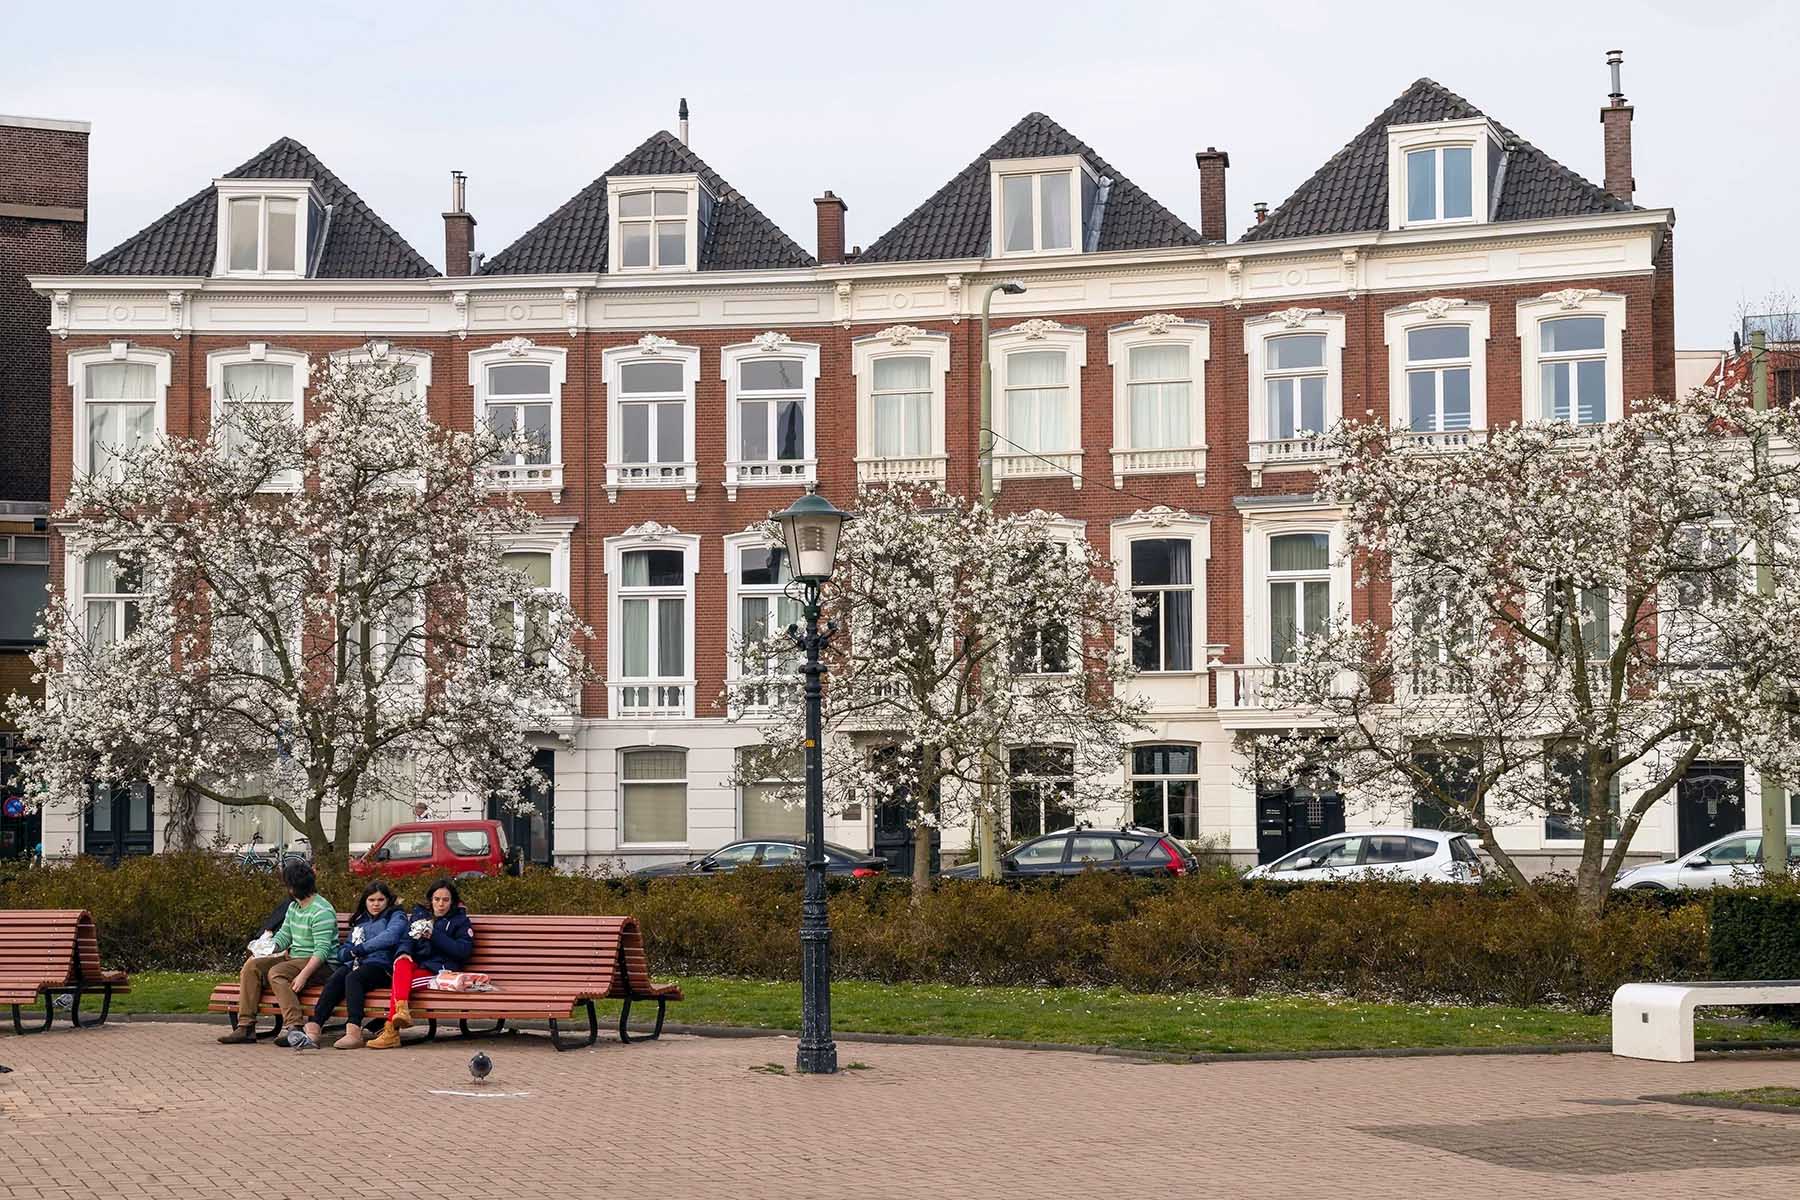 Three people sitting on a bench, with large houses in the background. They're at Prins Hendrikplein, an expensive neighborhood in The Hague.